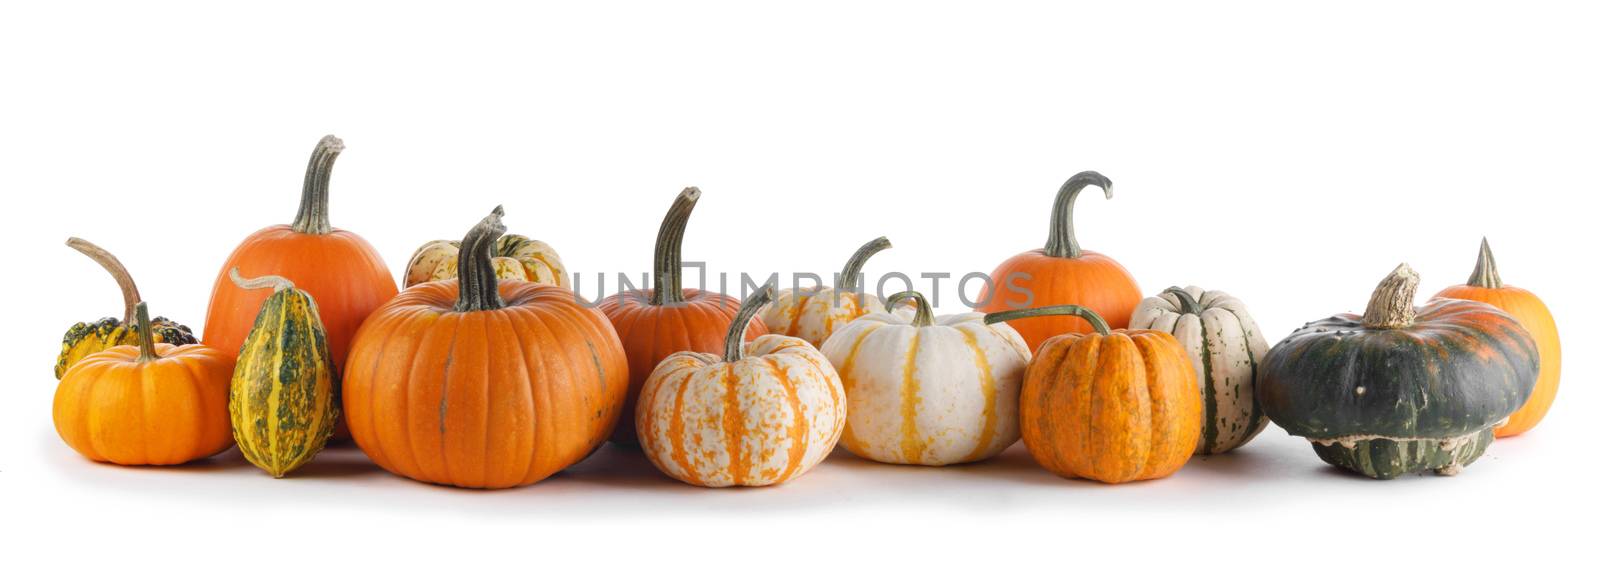 Many Pumpkins on white background by Yellowj